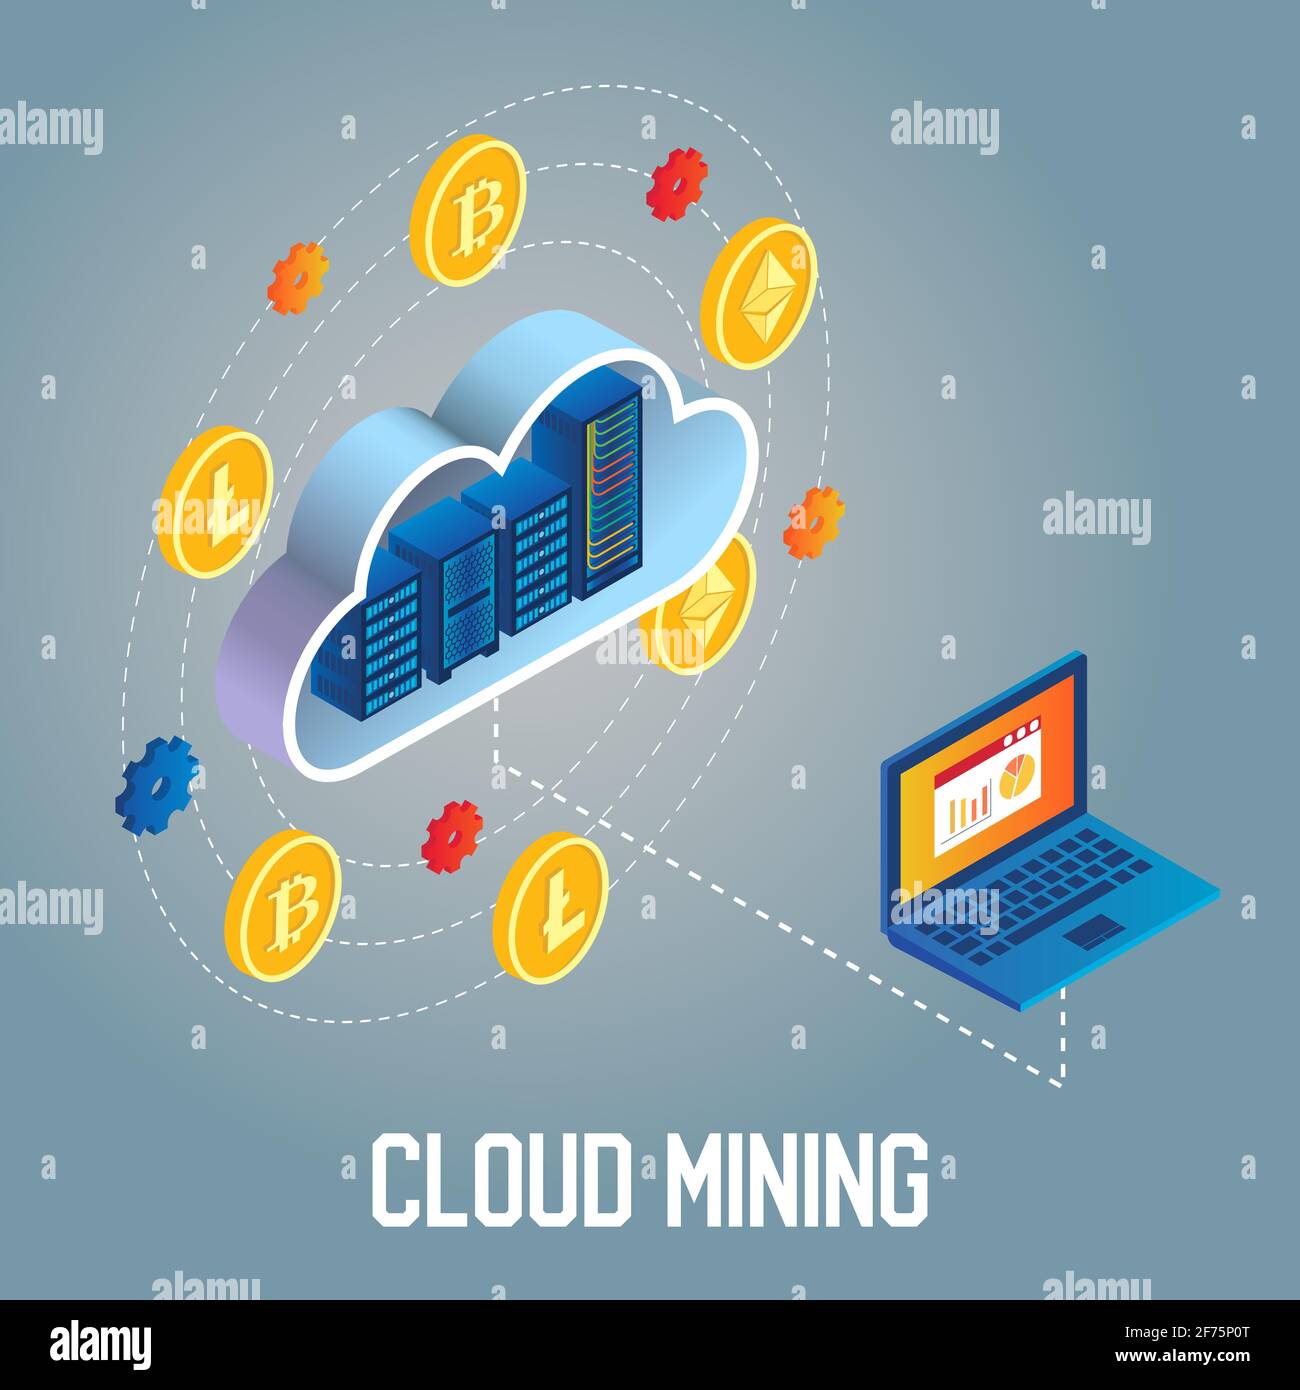 Cloud mining concept vector isometric illustration Stock Vector